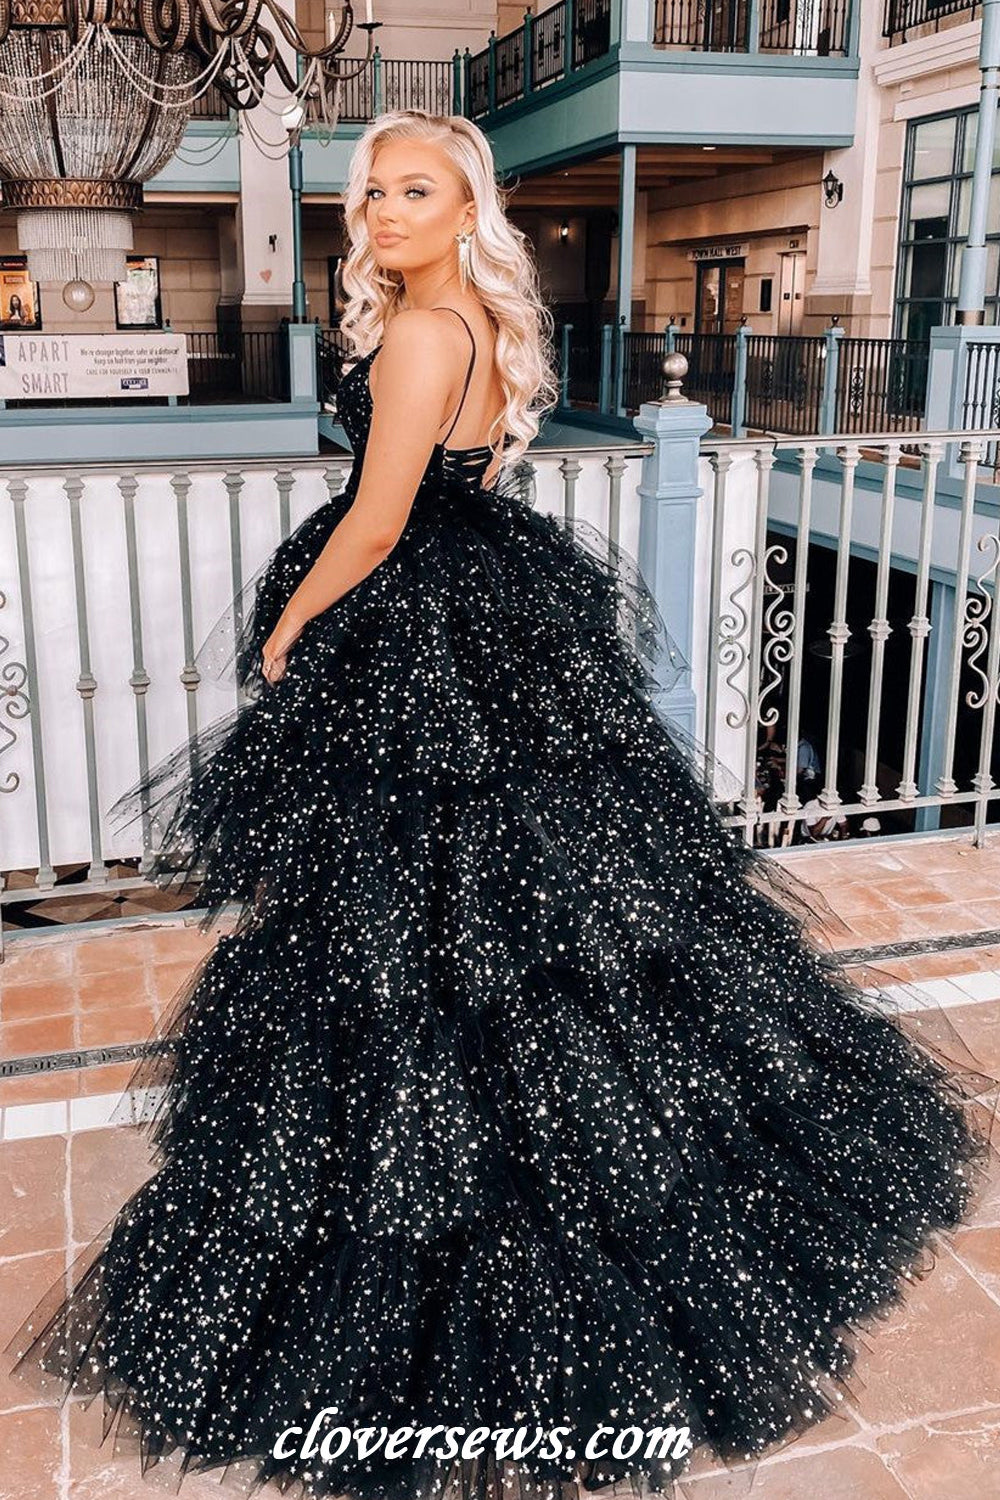 Black Glitter Tulle Spaghetti Strap Tiered High Low Shiny Prom Dresses, CP1150